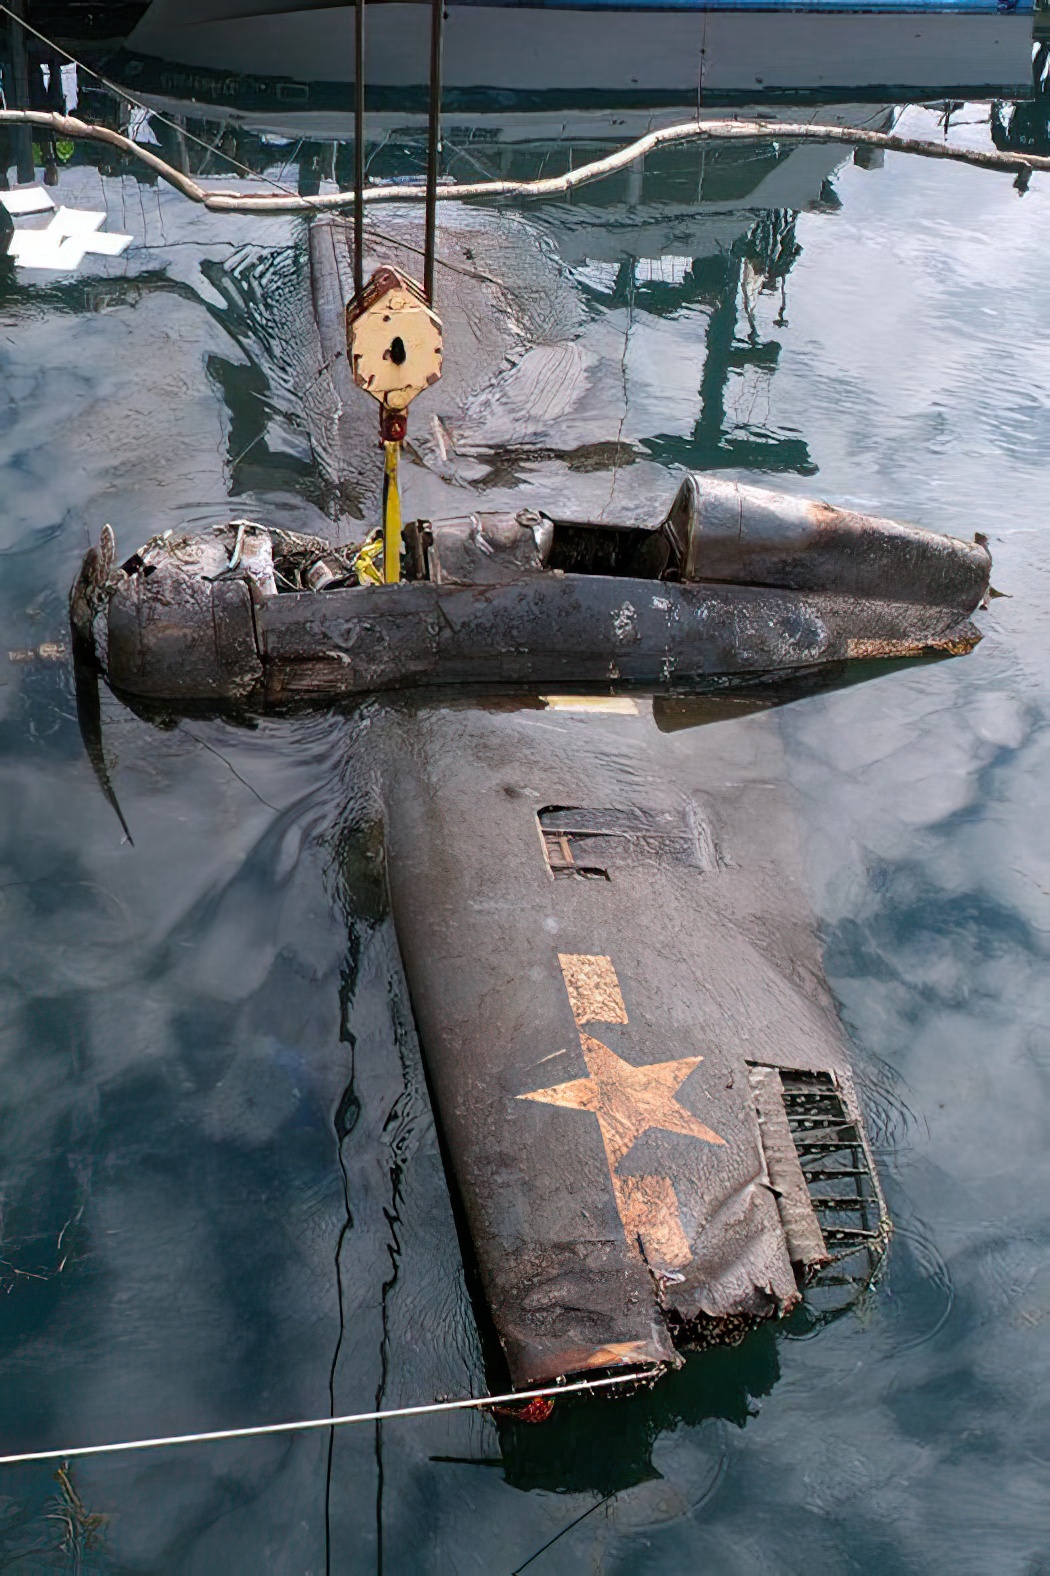 A General Motors/Eastern Aircraft Division FM-2 "Wildcat" was pulled out of Lake Michigan on Dec. 7, 2012 after spending 68 years beneath the waves